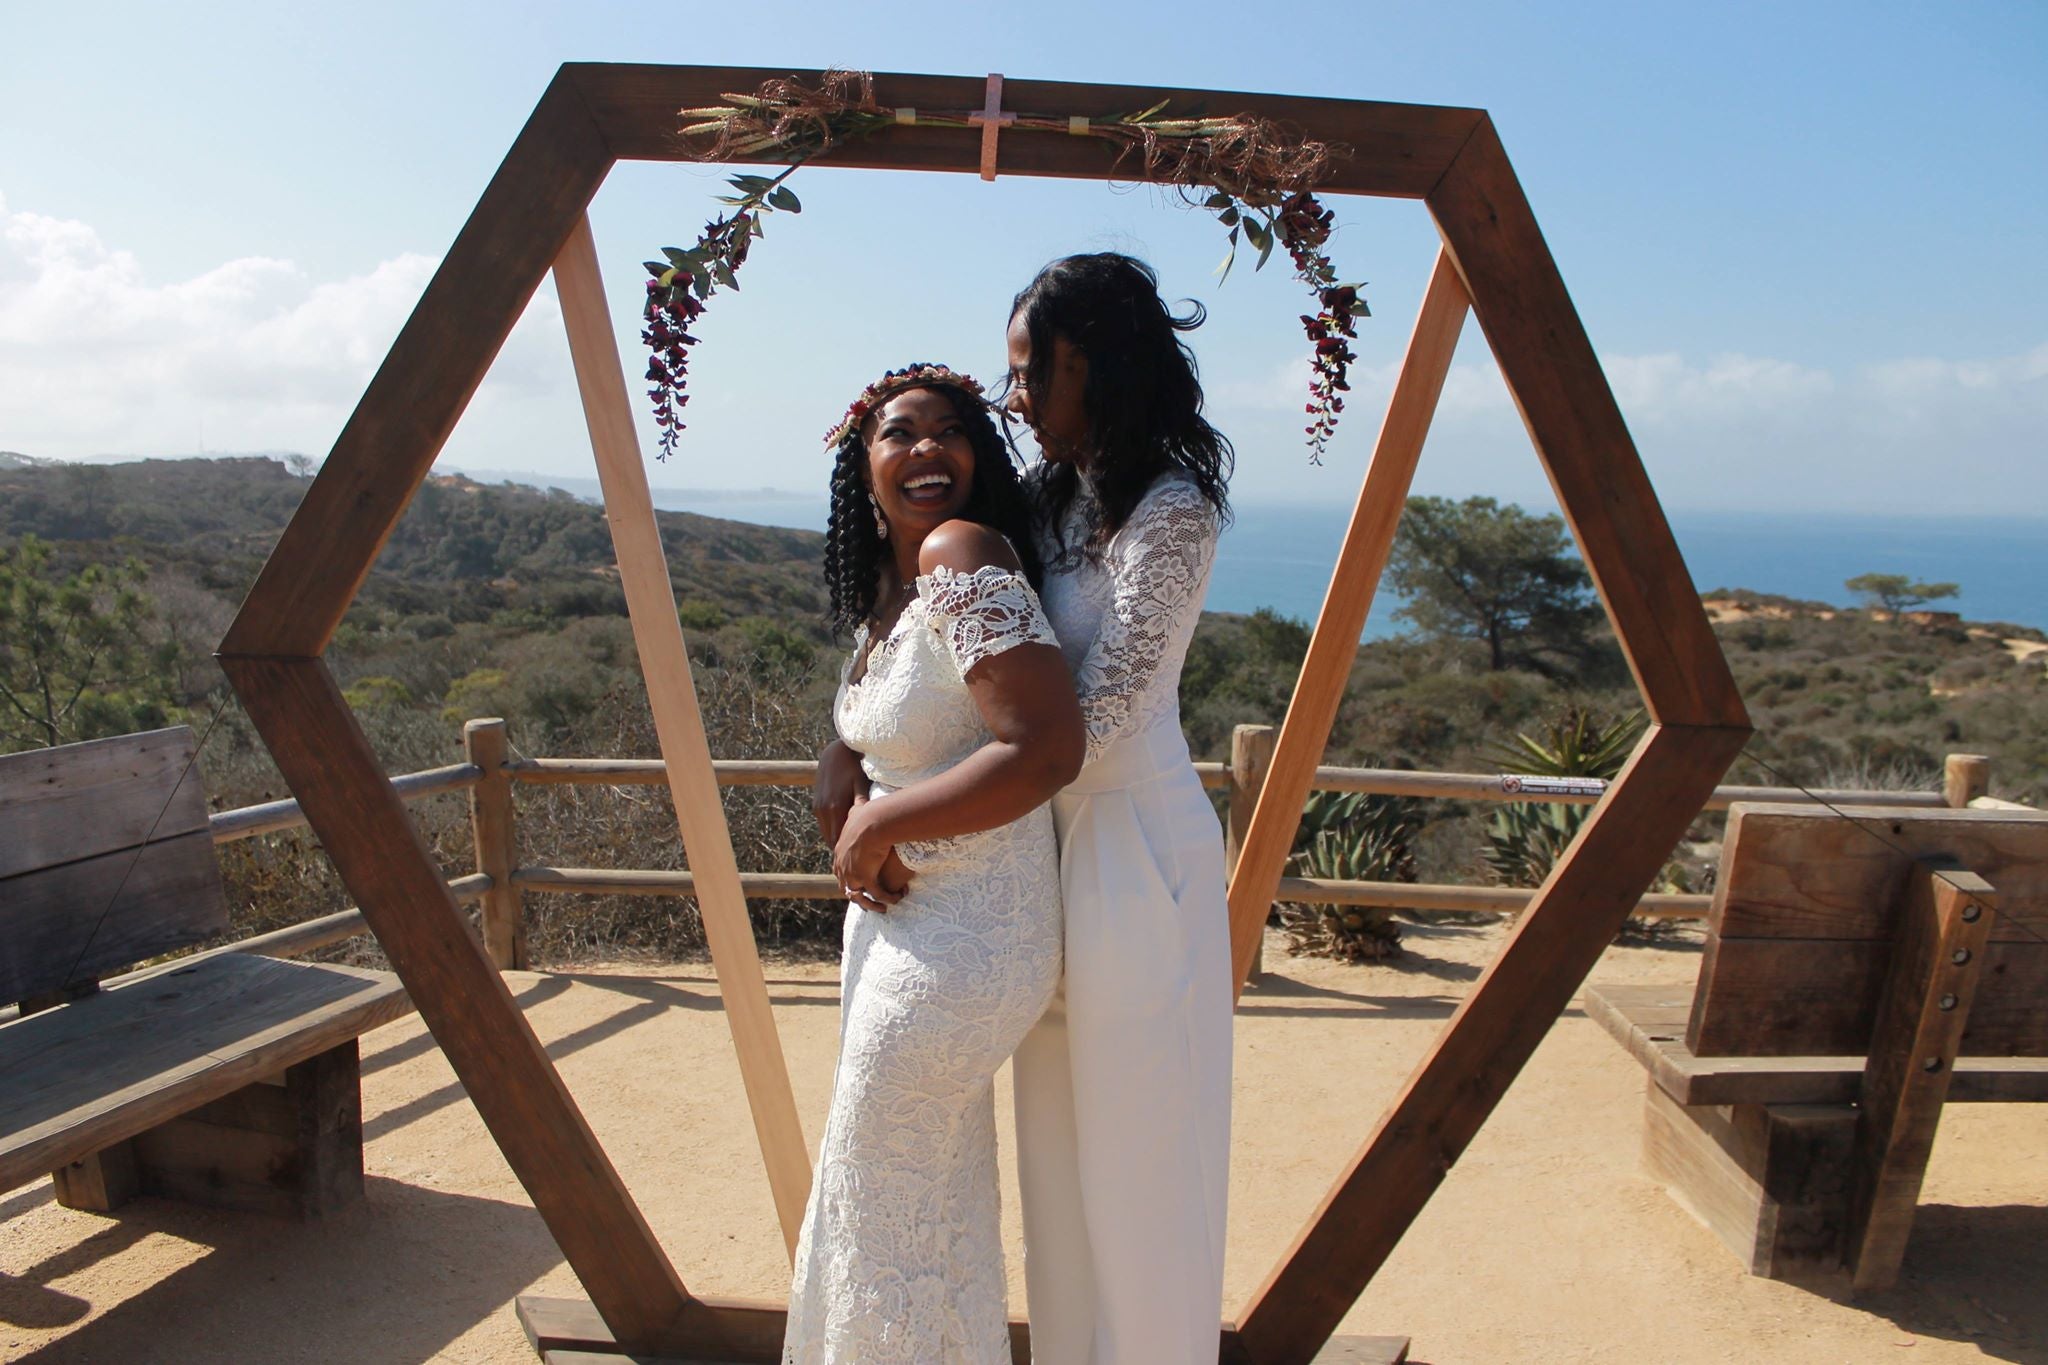 Bridal Bliss: Camille and Kristen's Cliffside Wedding Took Us To New Heights